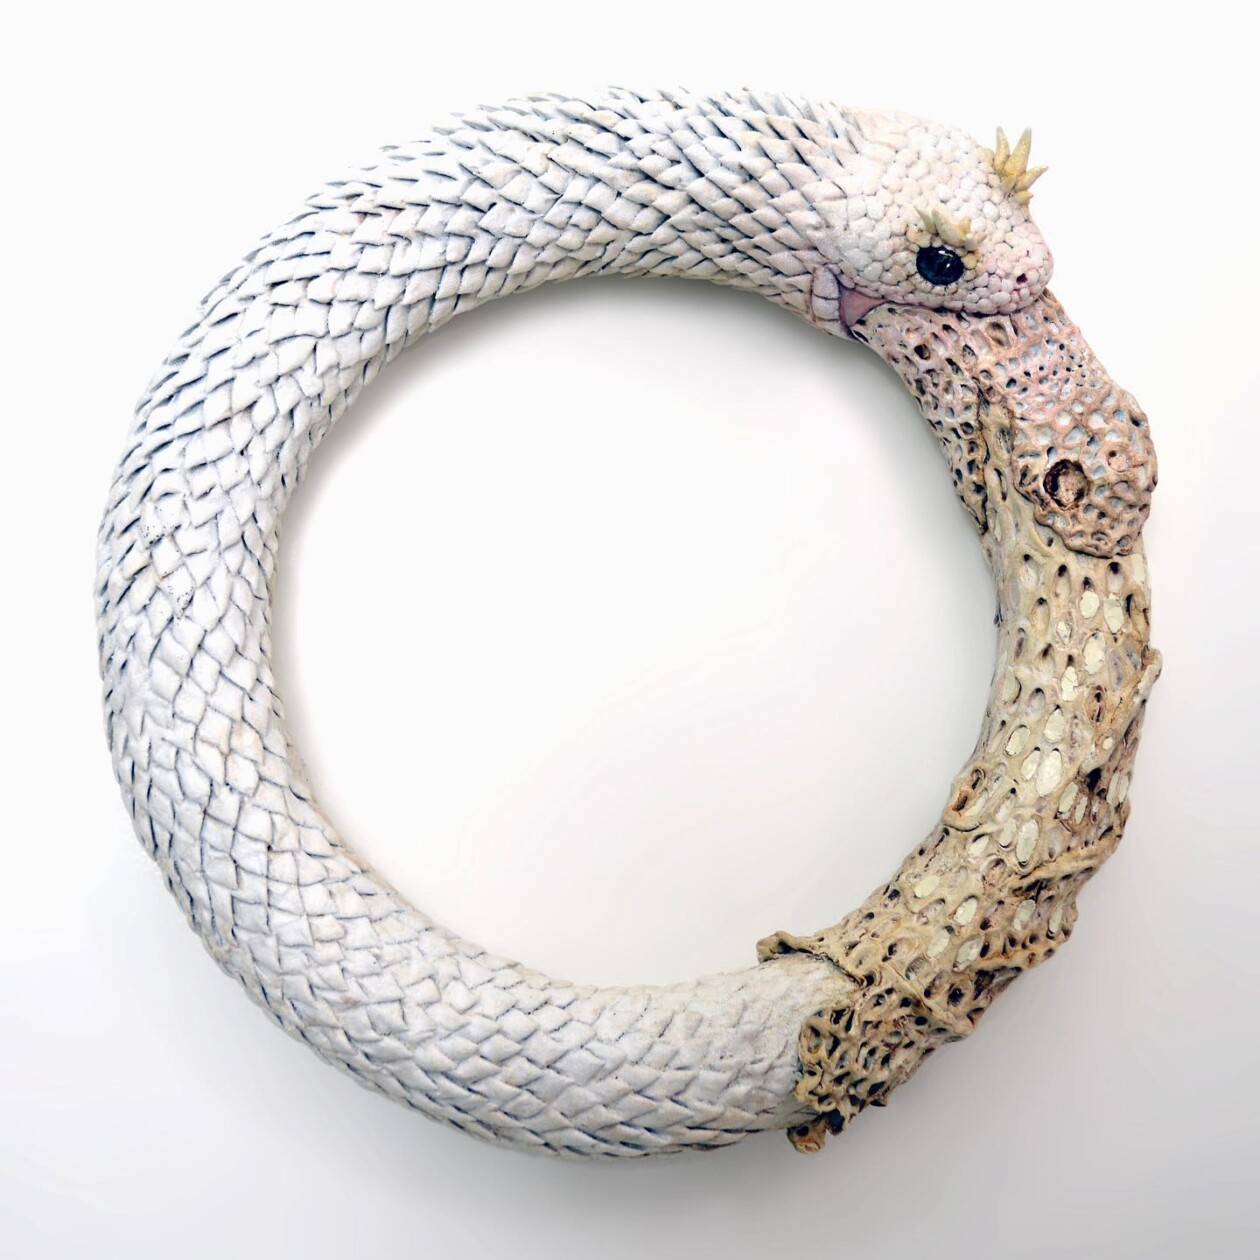 Fantastic Eggshell Sculptures Of Earth's Most Ancient Denizens By Sarah Lee (1)